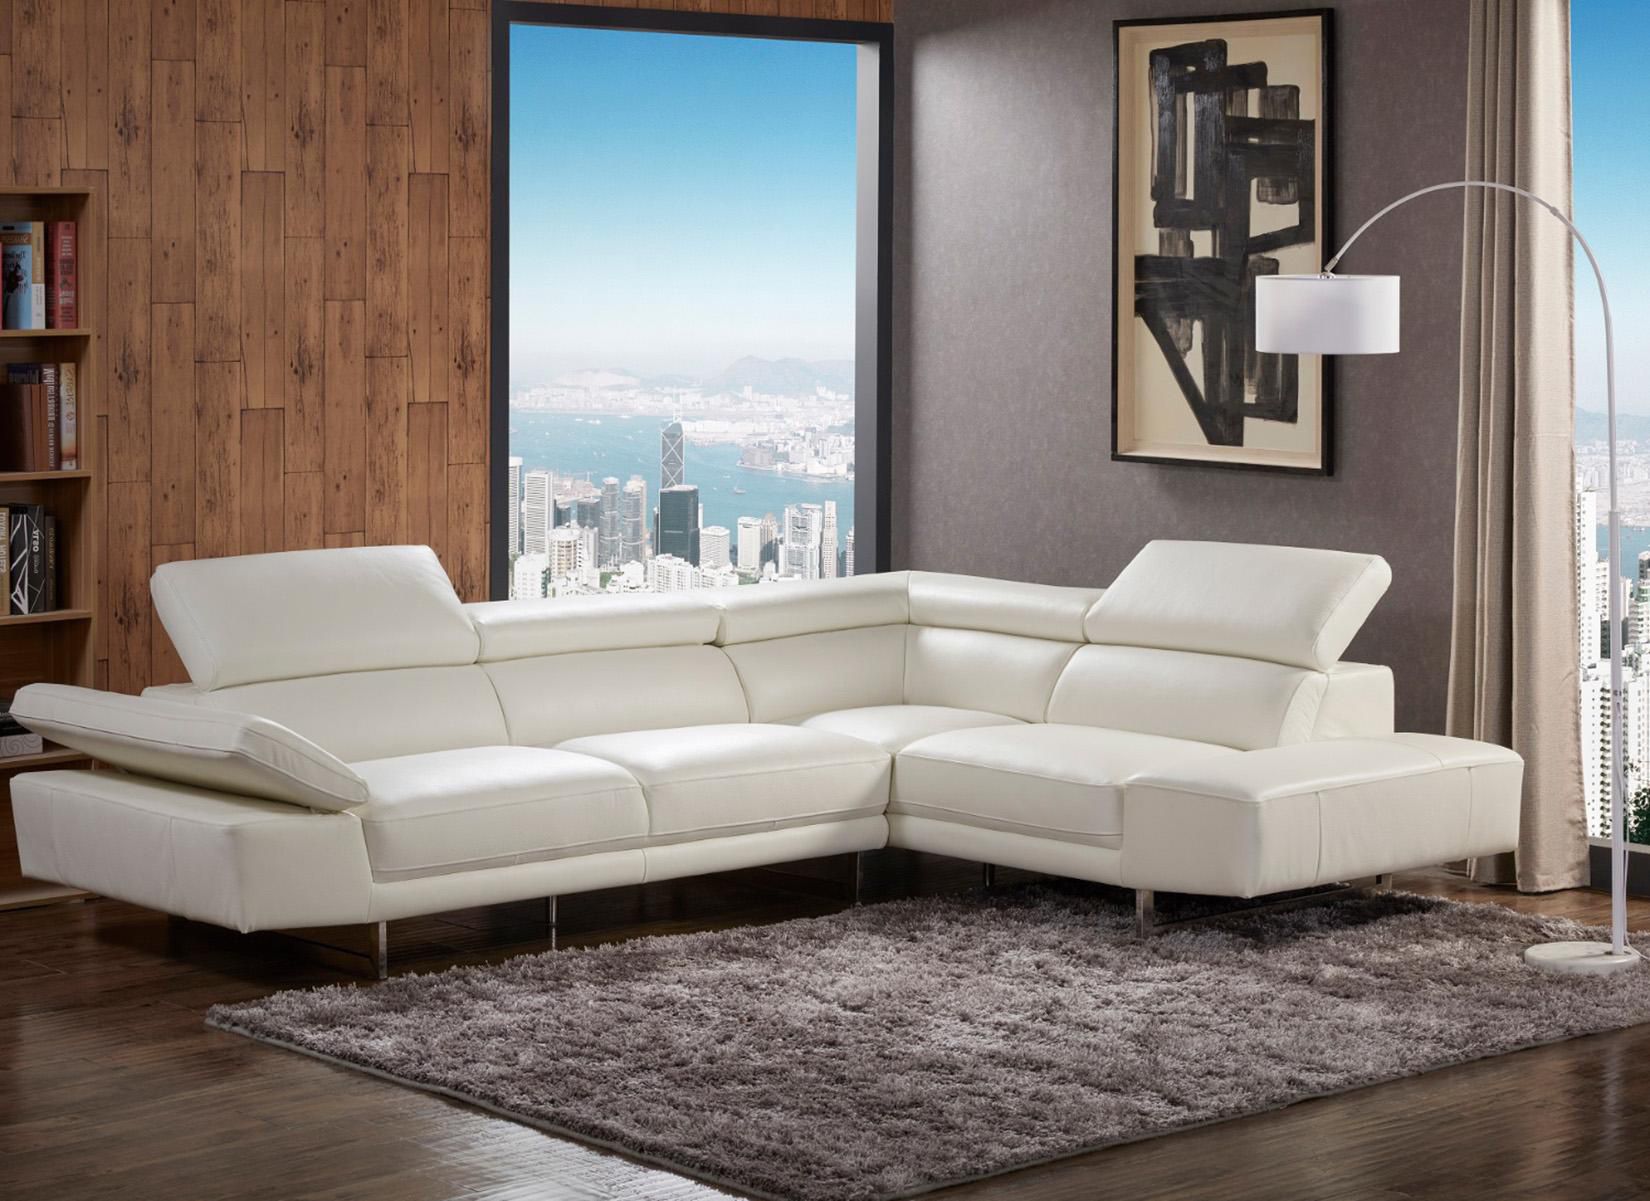 White Italian Leather & Adjustable Headrests Sectional